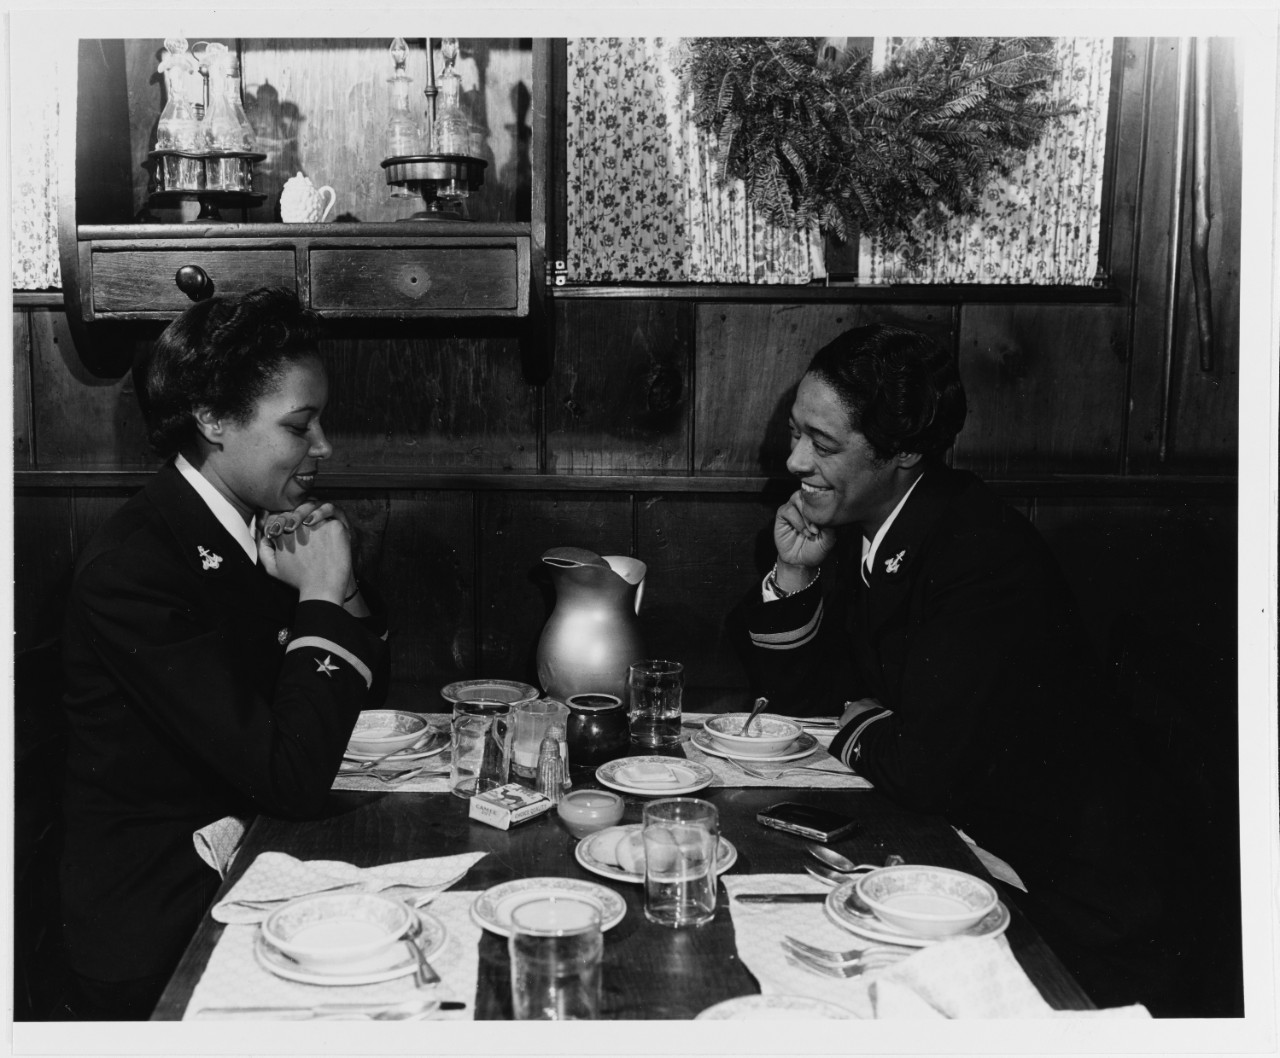 Photo #: 80-G-297437 Ensign Frances Wills (left) and Lieutenant (Junior Grade) Harriet Ida Pickens enjoy lunch following their graduation from the Naval Reserve Midshipmen's School (WR) at Northampton, Massachusetts, circa December 1944. They were members of the school's final class, and were the Navy's first African-American WAVES officers. Official U.S. Navy Photograph, now in the collections of the National Archives.